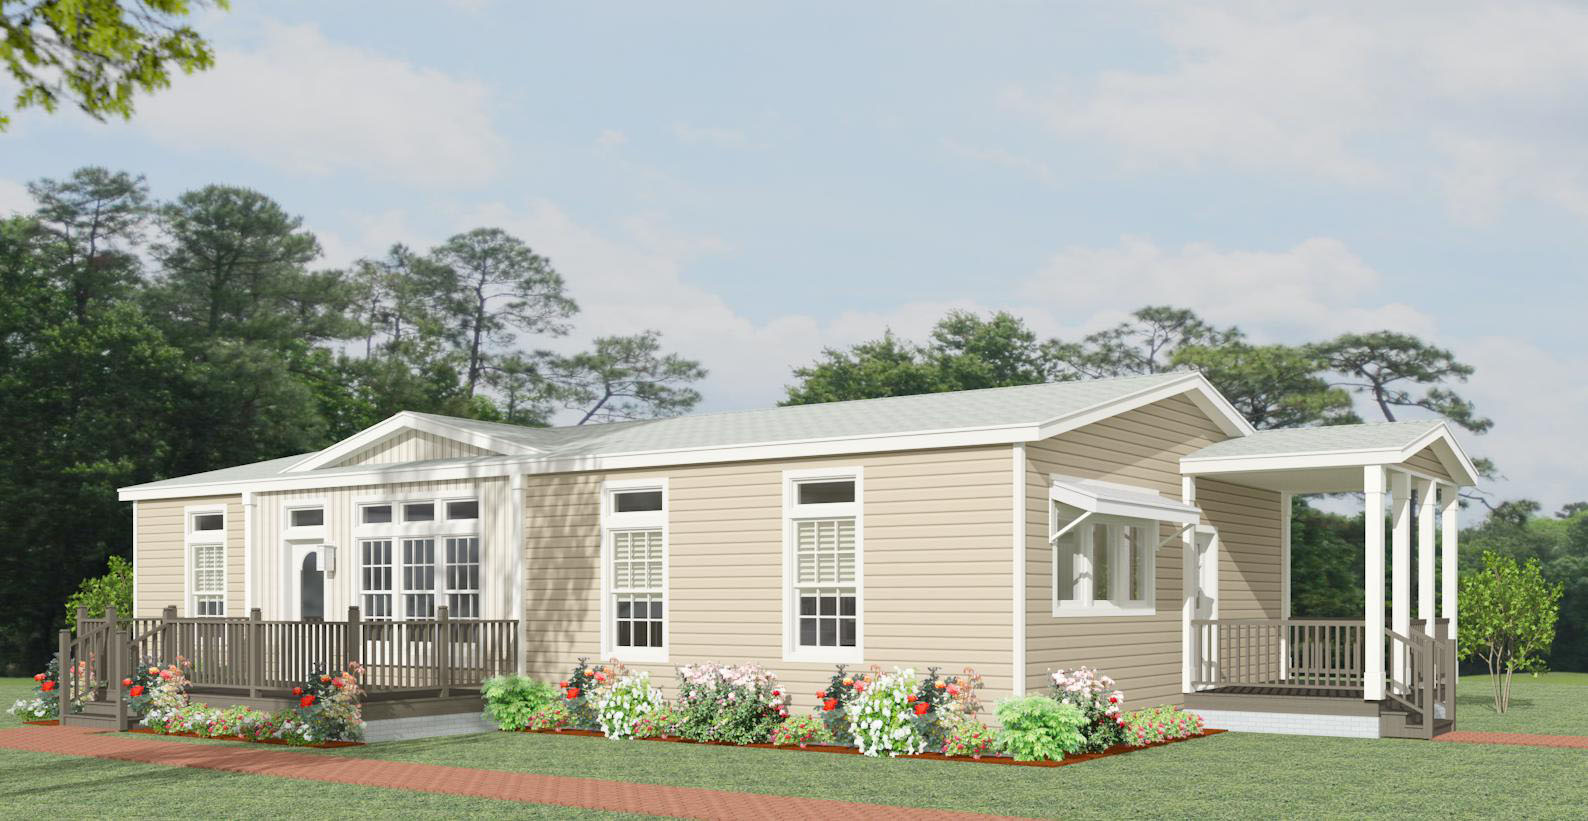 How Energy Efficient Are Manufactured Homes?